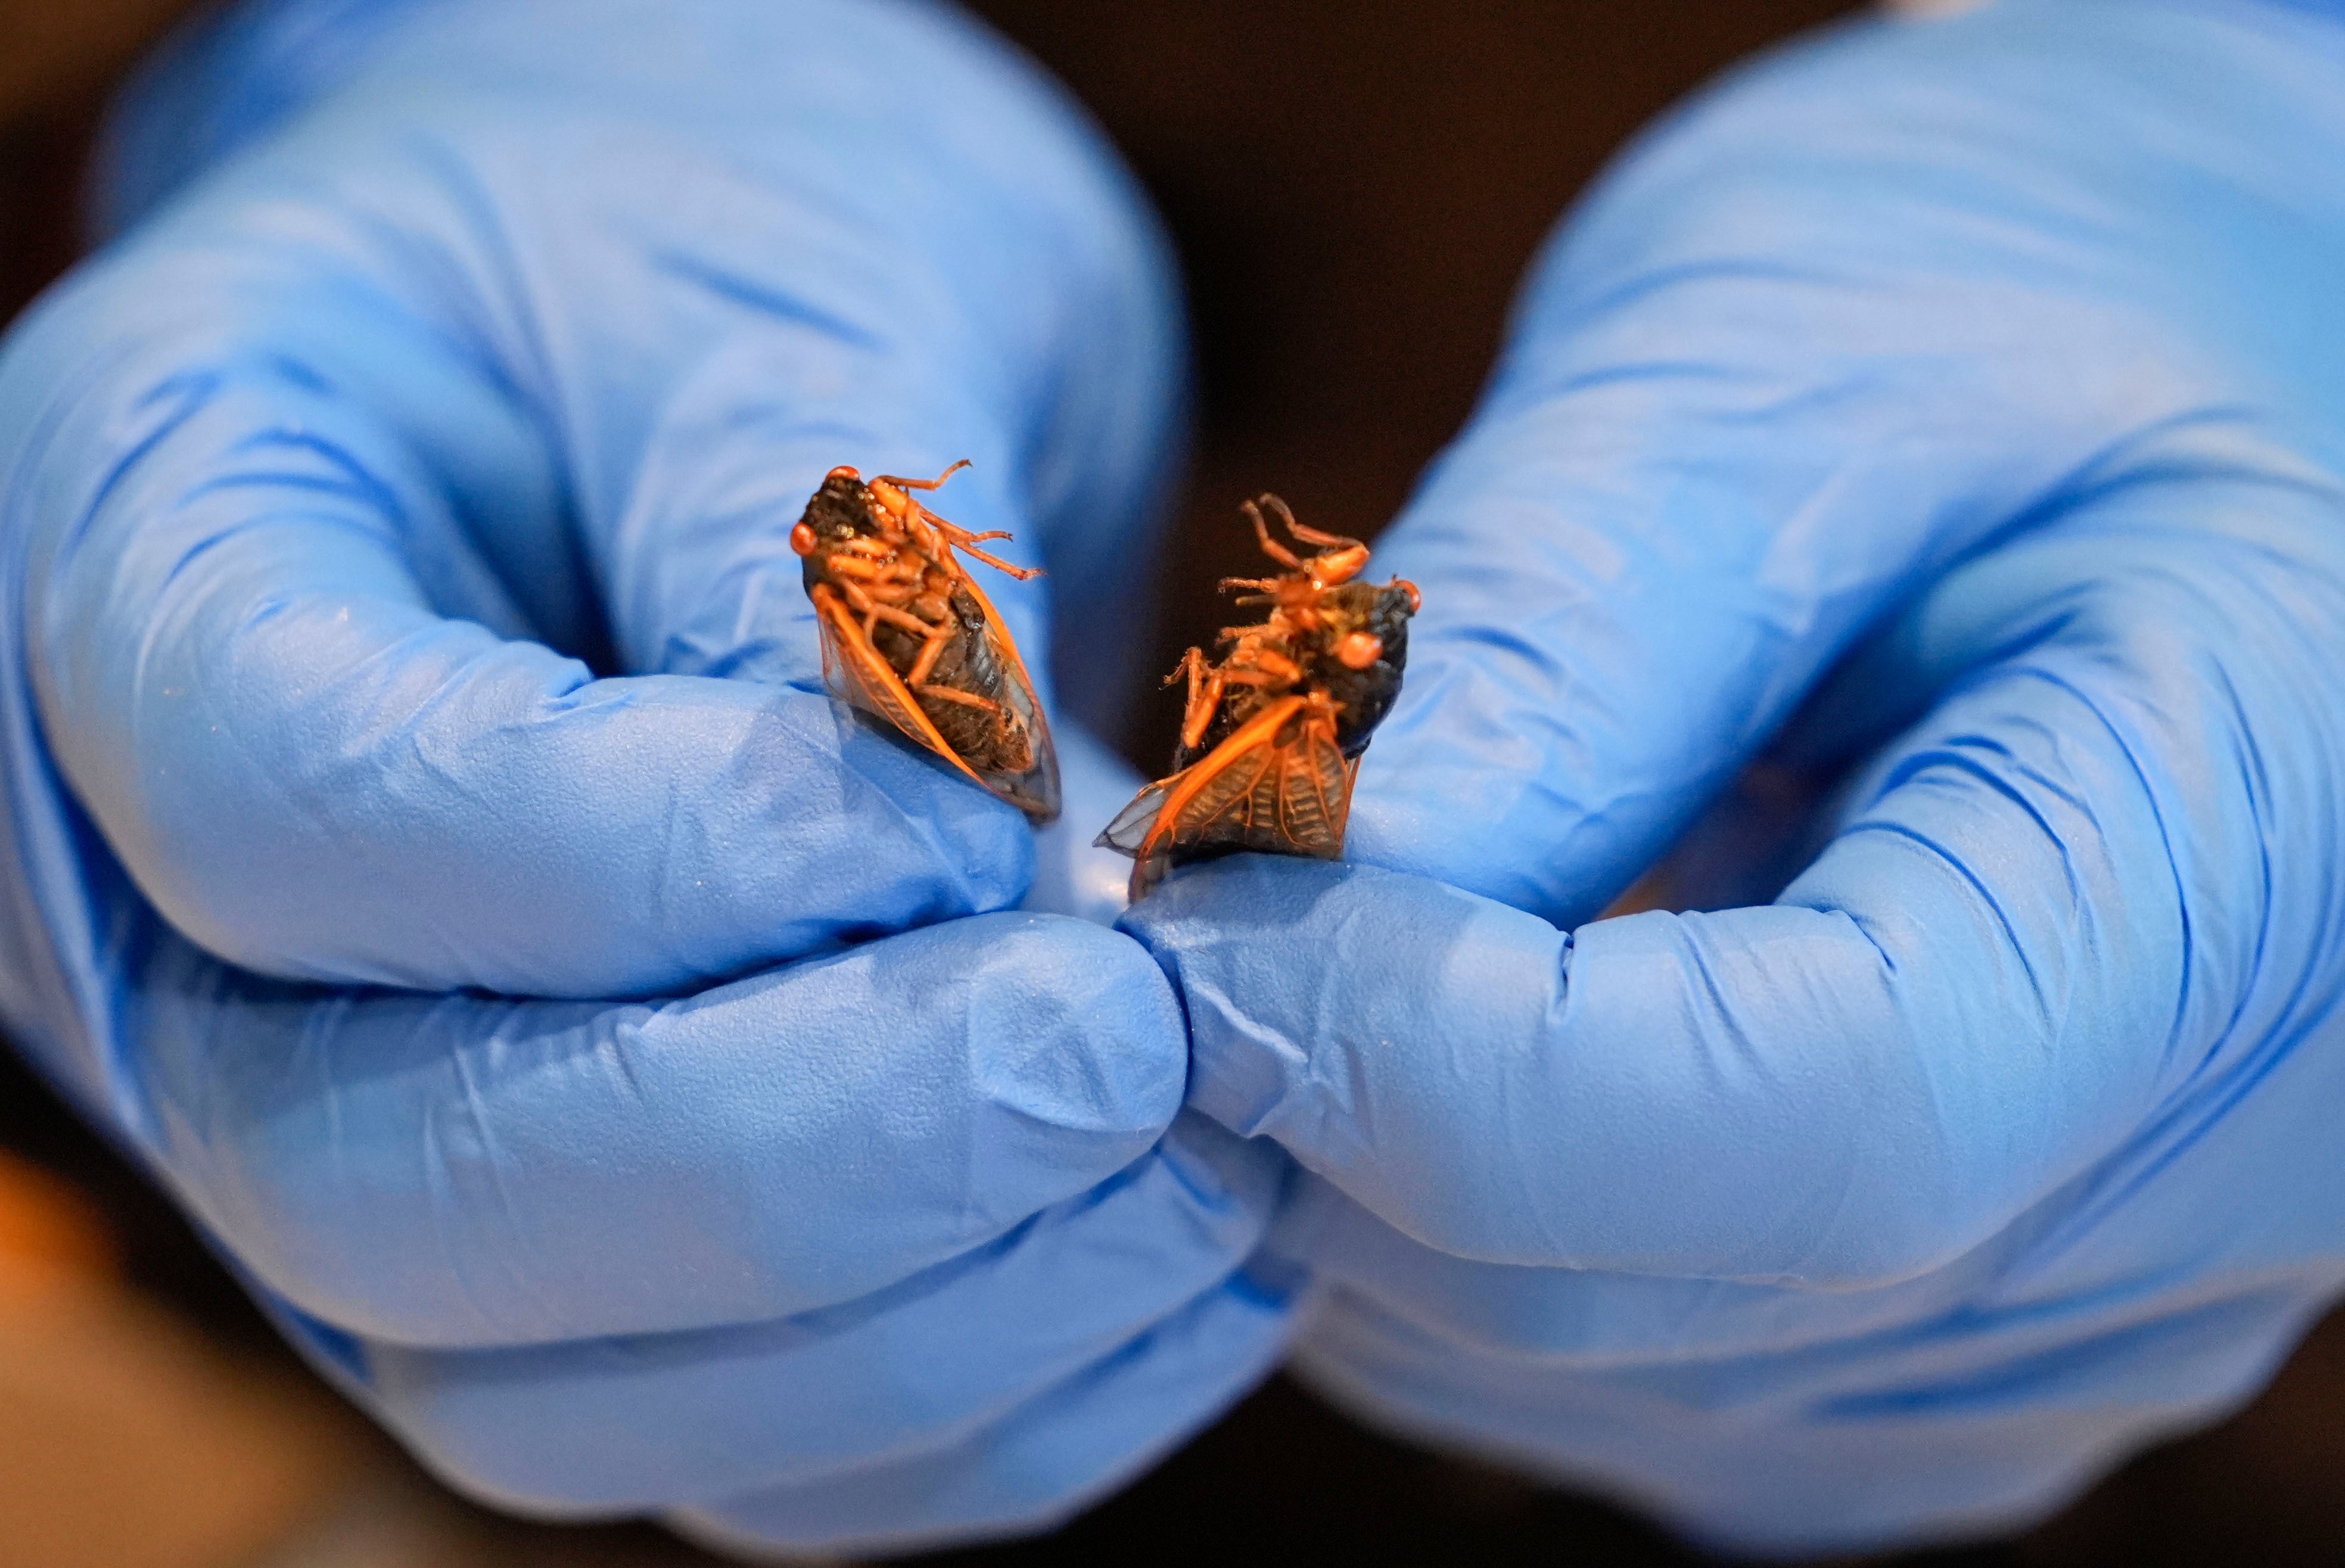 Zach Lemann, curator of animal collections for the Audubon Insectarium, prepares cicadas for eating